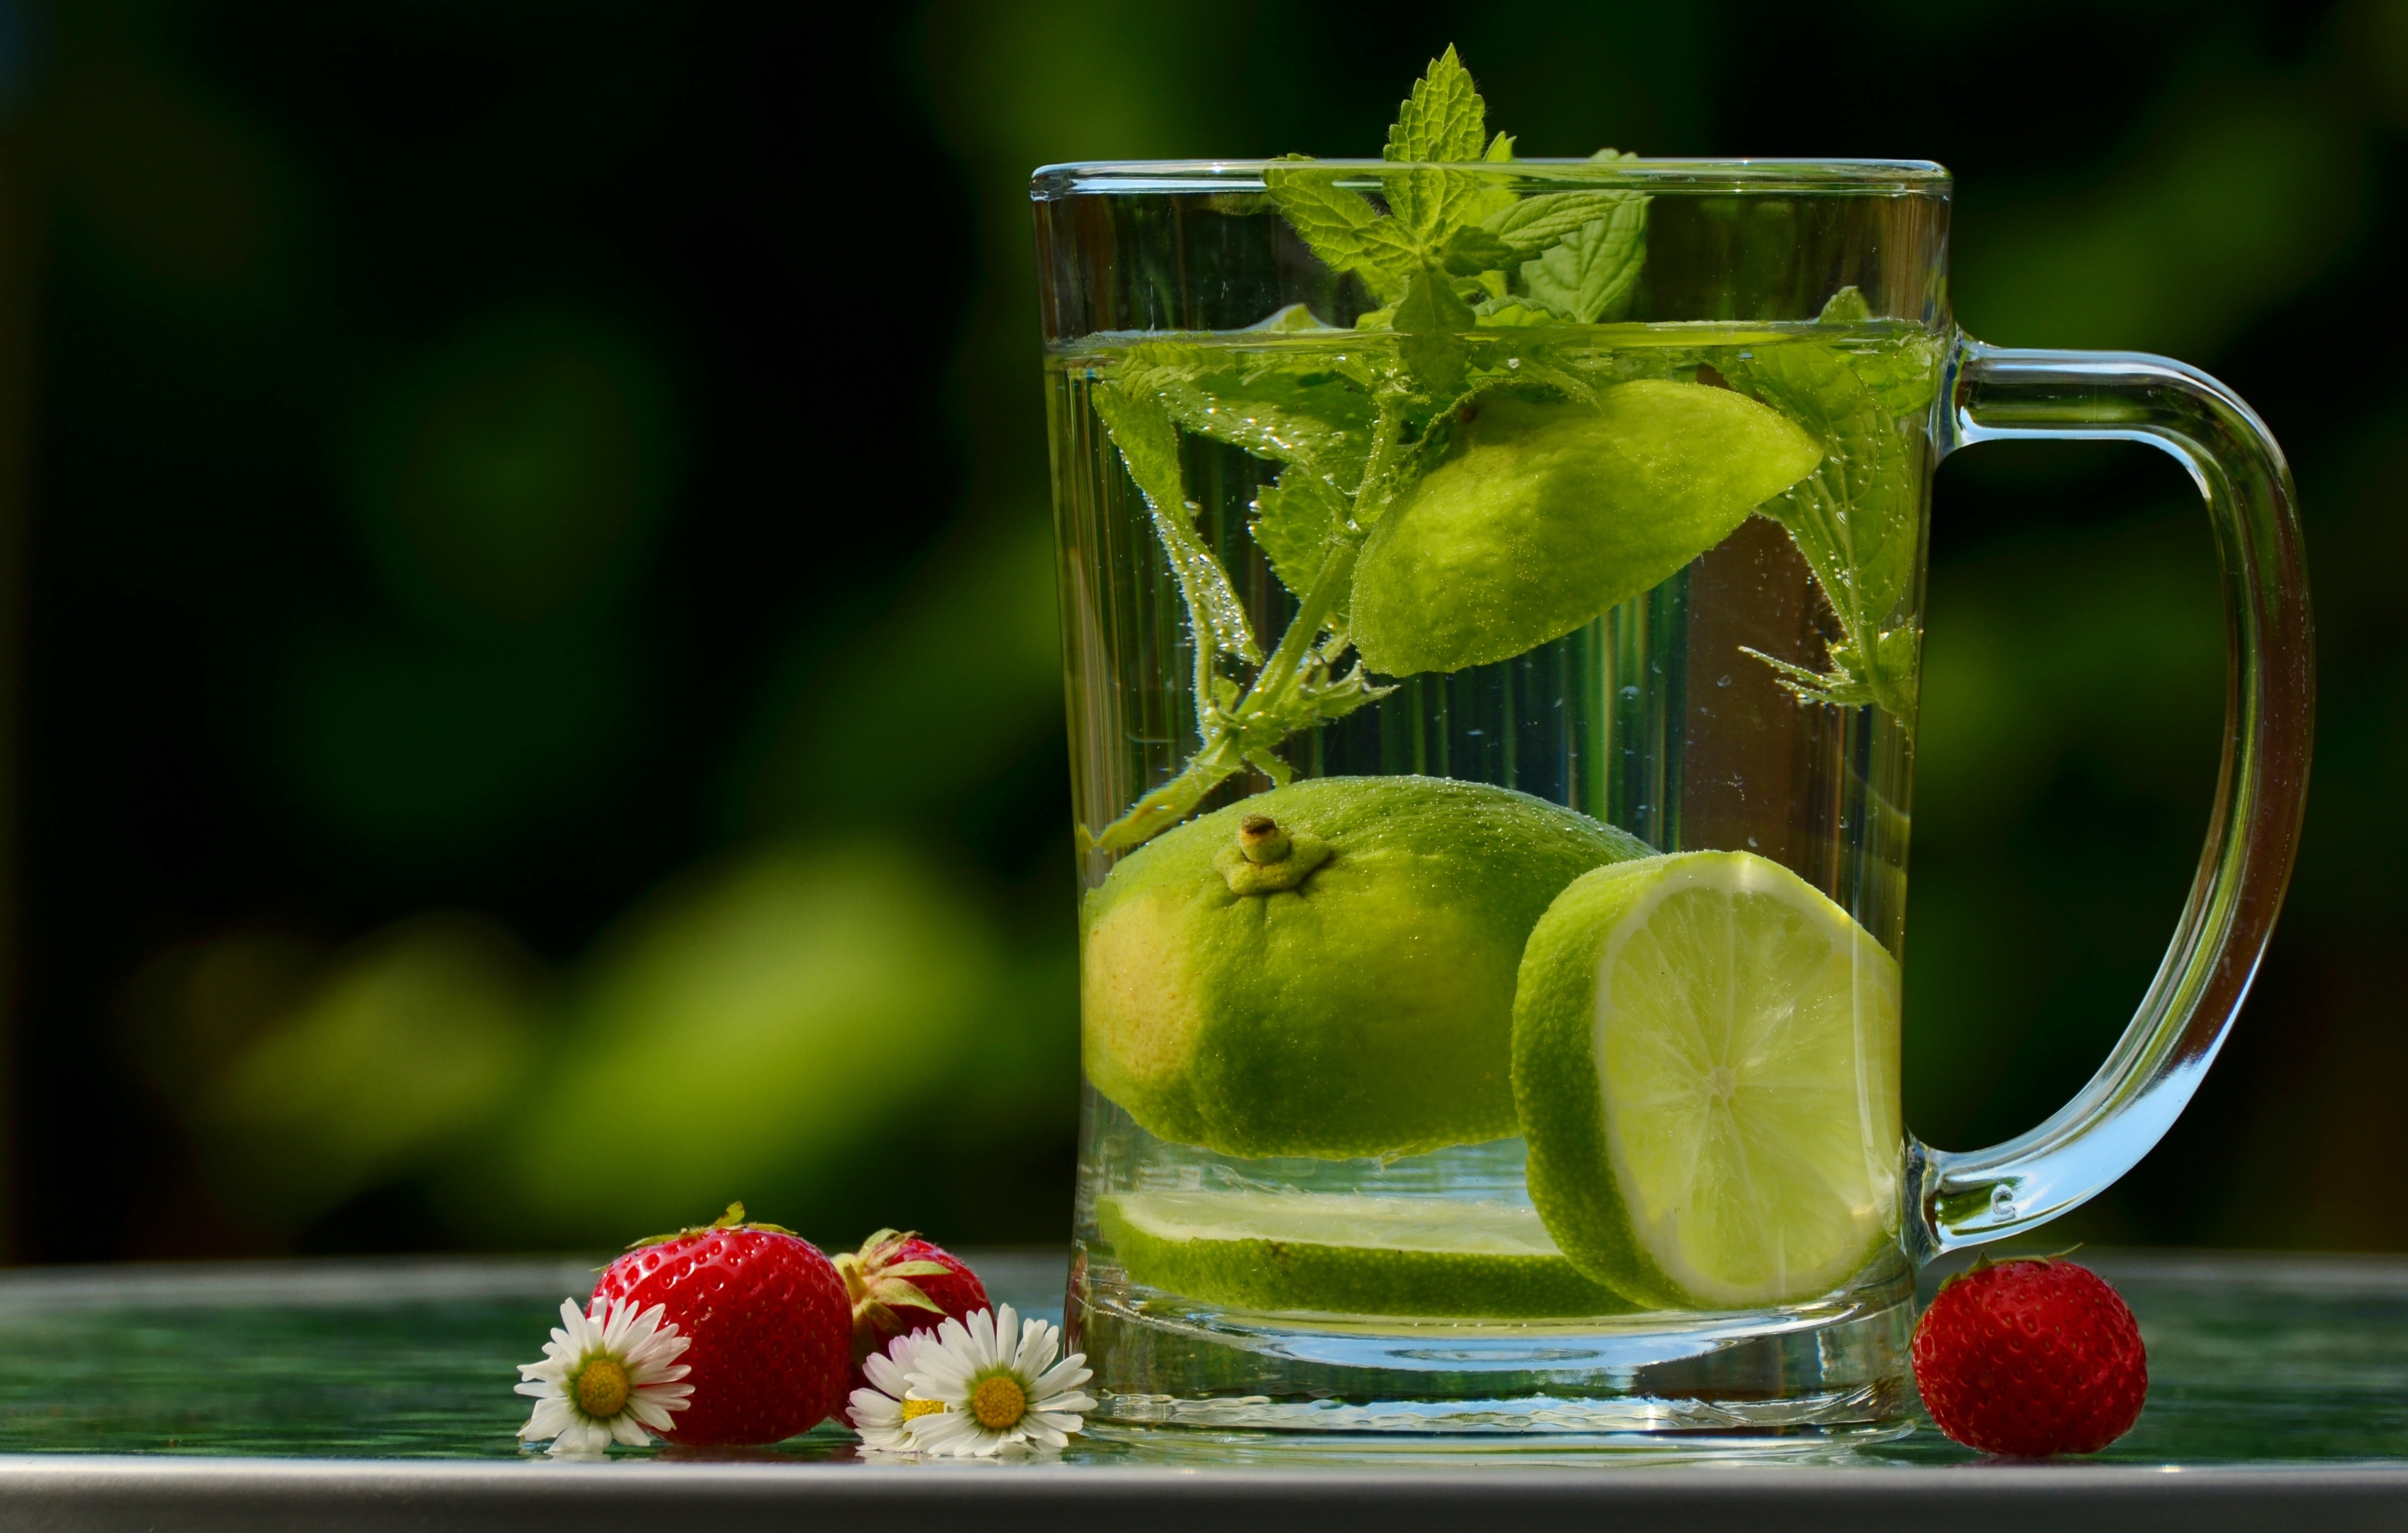 Herbs and limes; cleaning up a toxic liver.